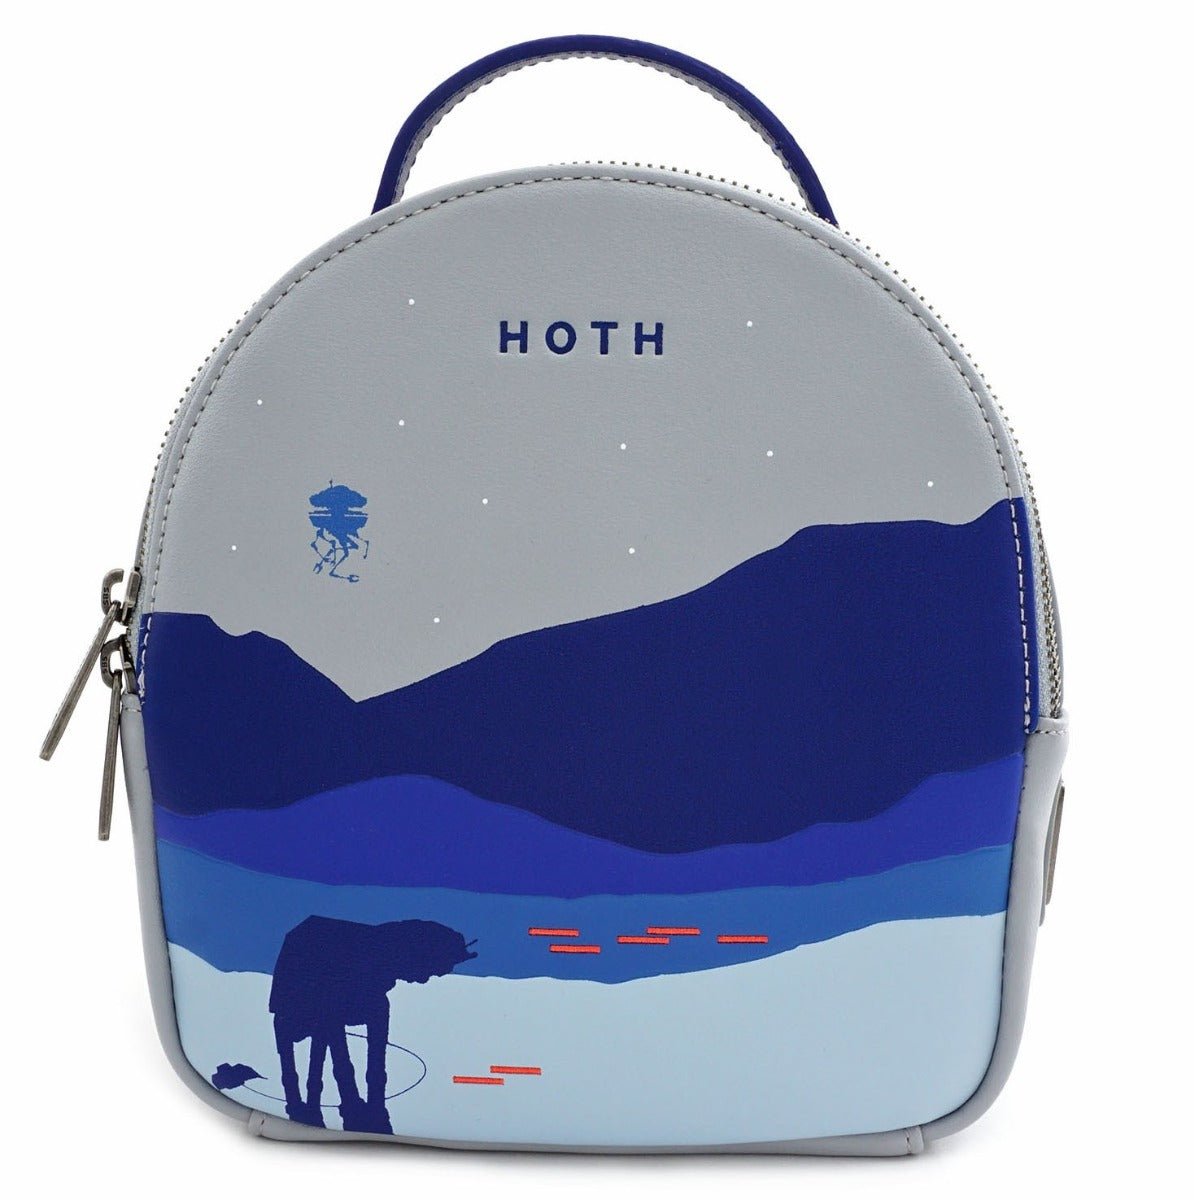 Loungefly x Star Wars Hoth Convertible Backpack Set - GeekCore